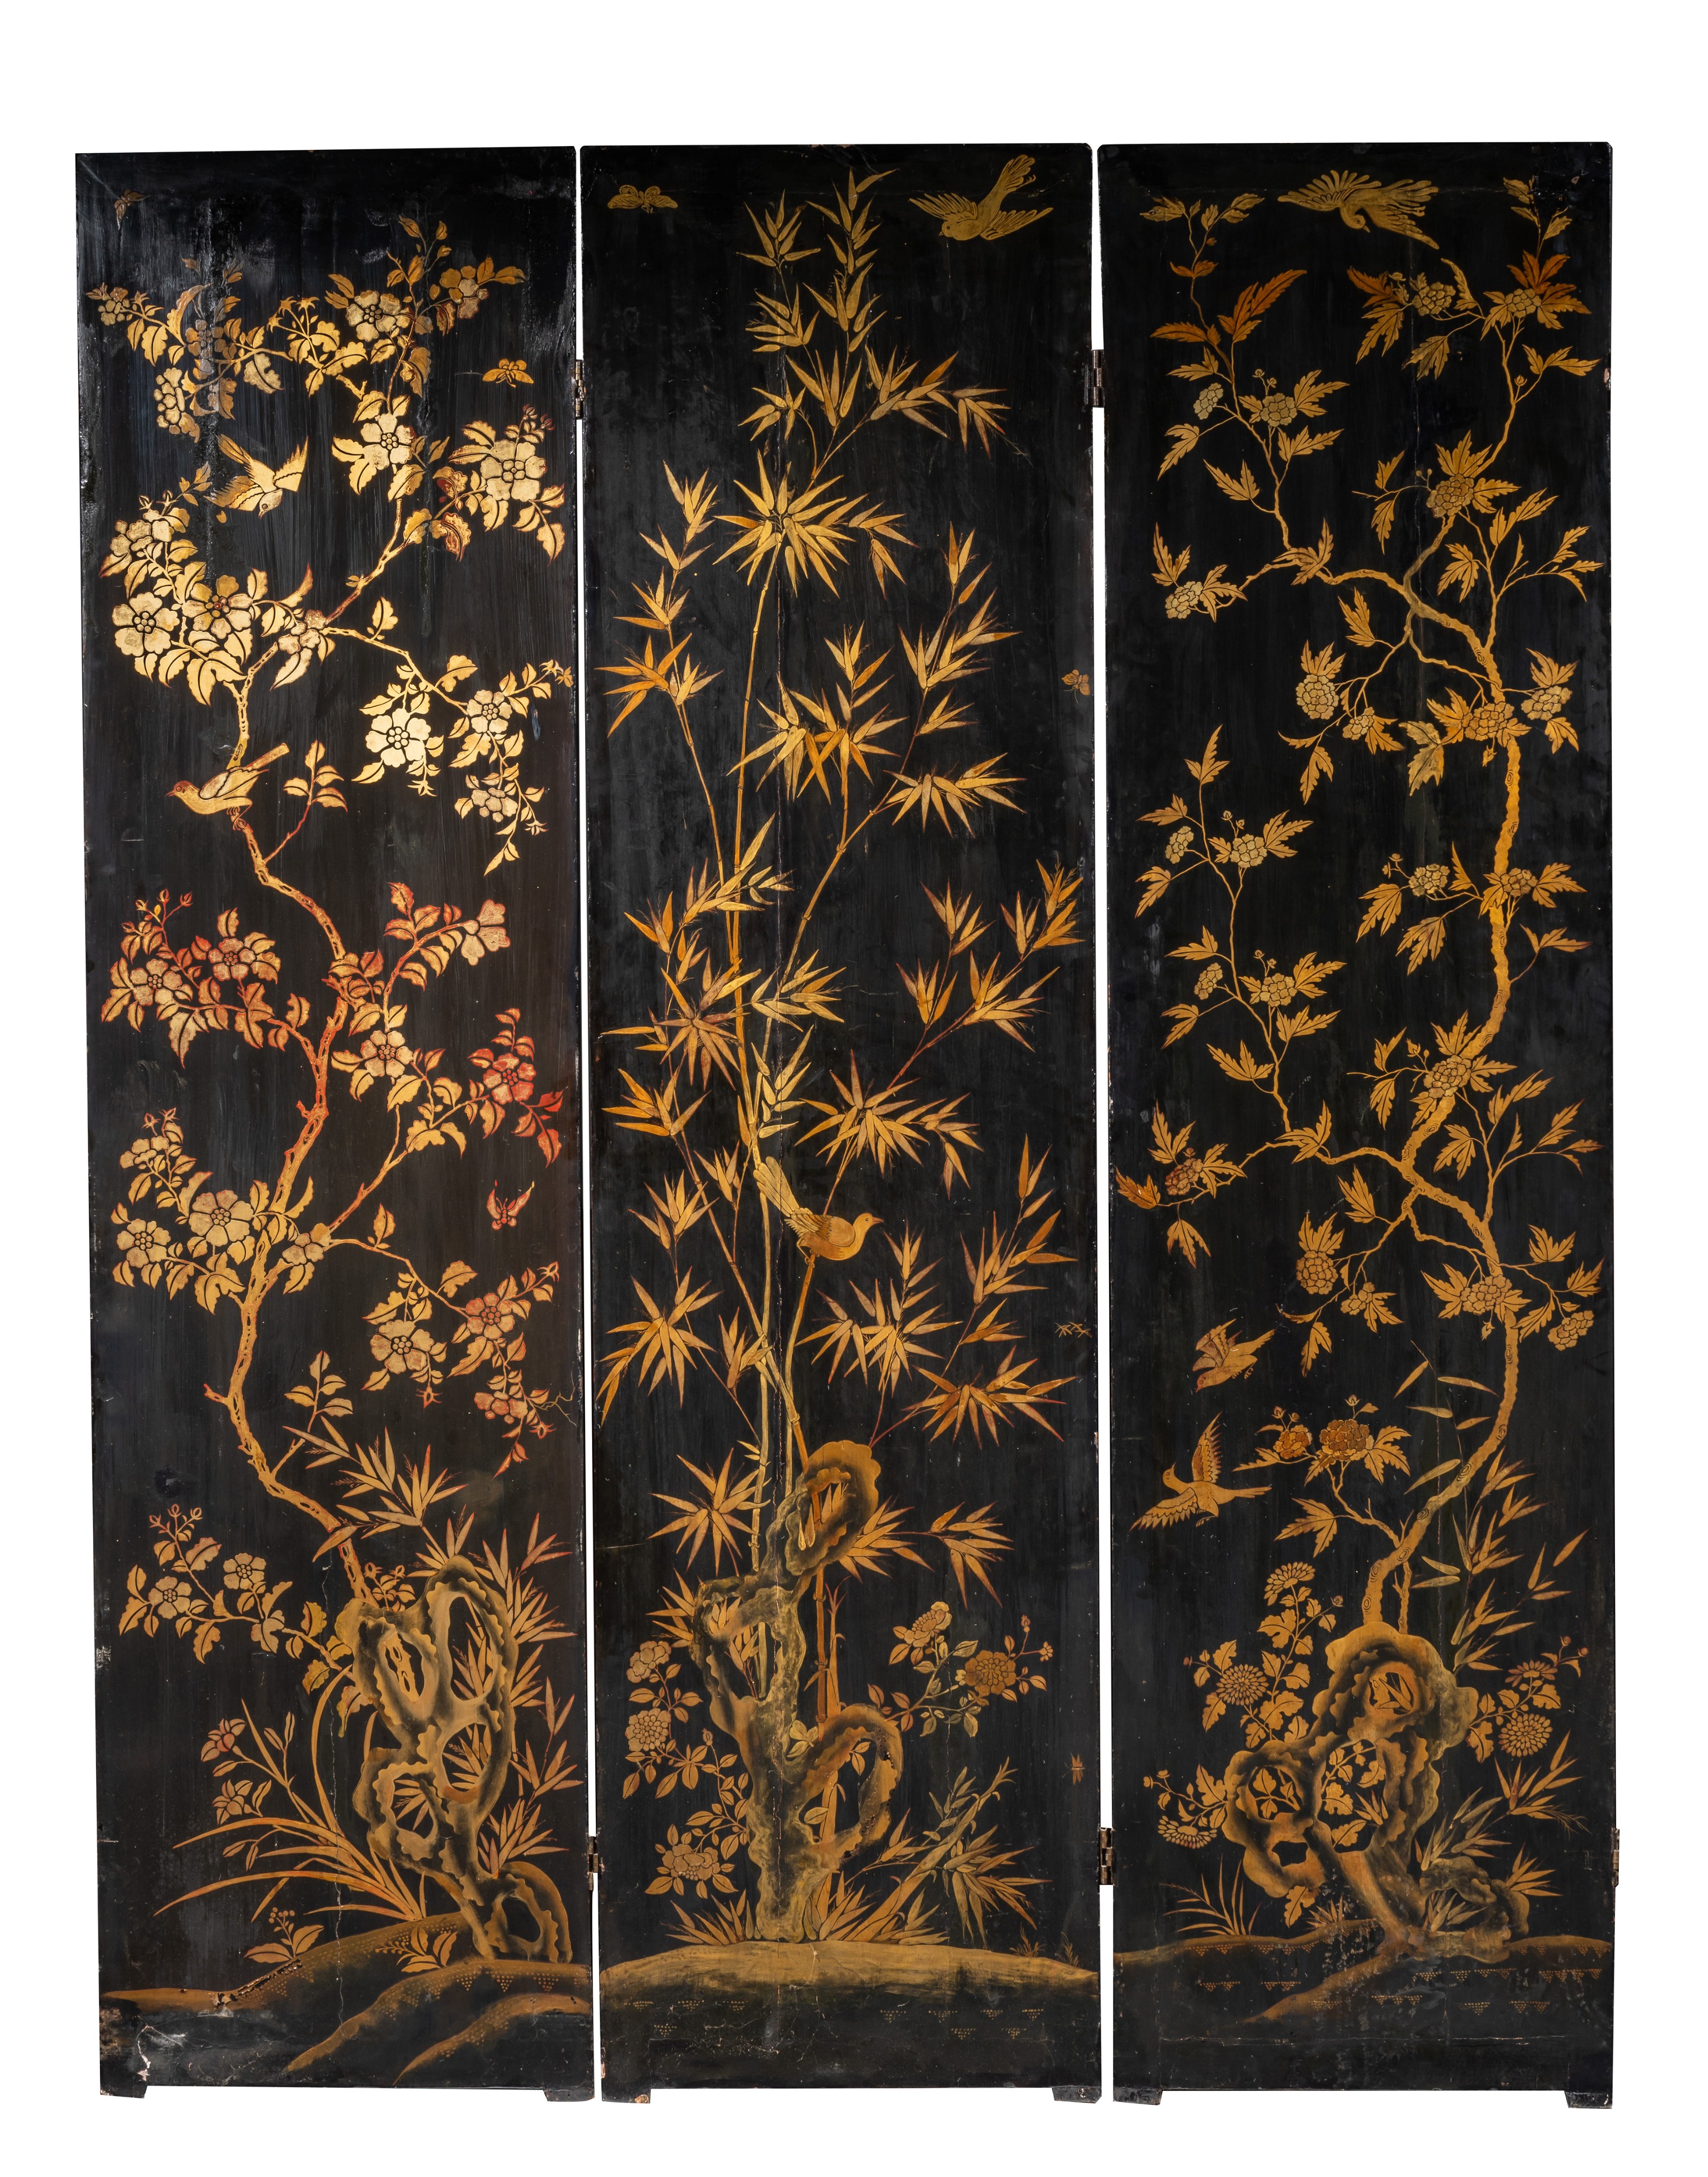 A Chinese export eight-panel gilt and black lacquer screen, late Qing dynasty, late 18thC/early 19th - Image 7 of 9